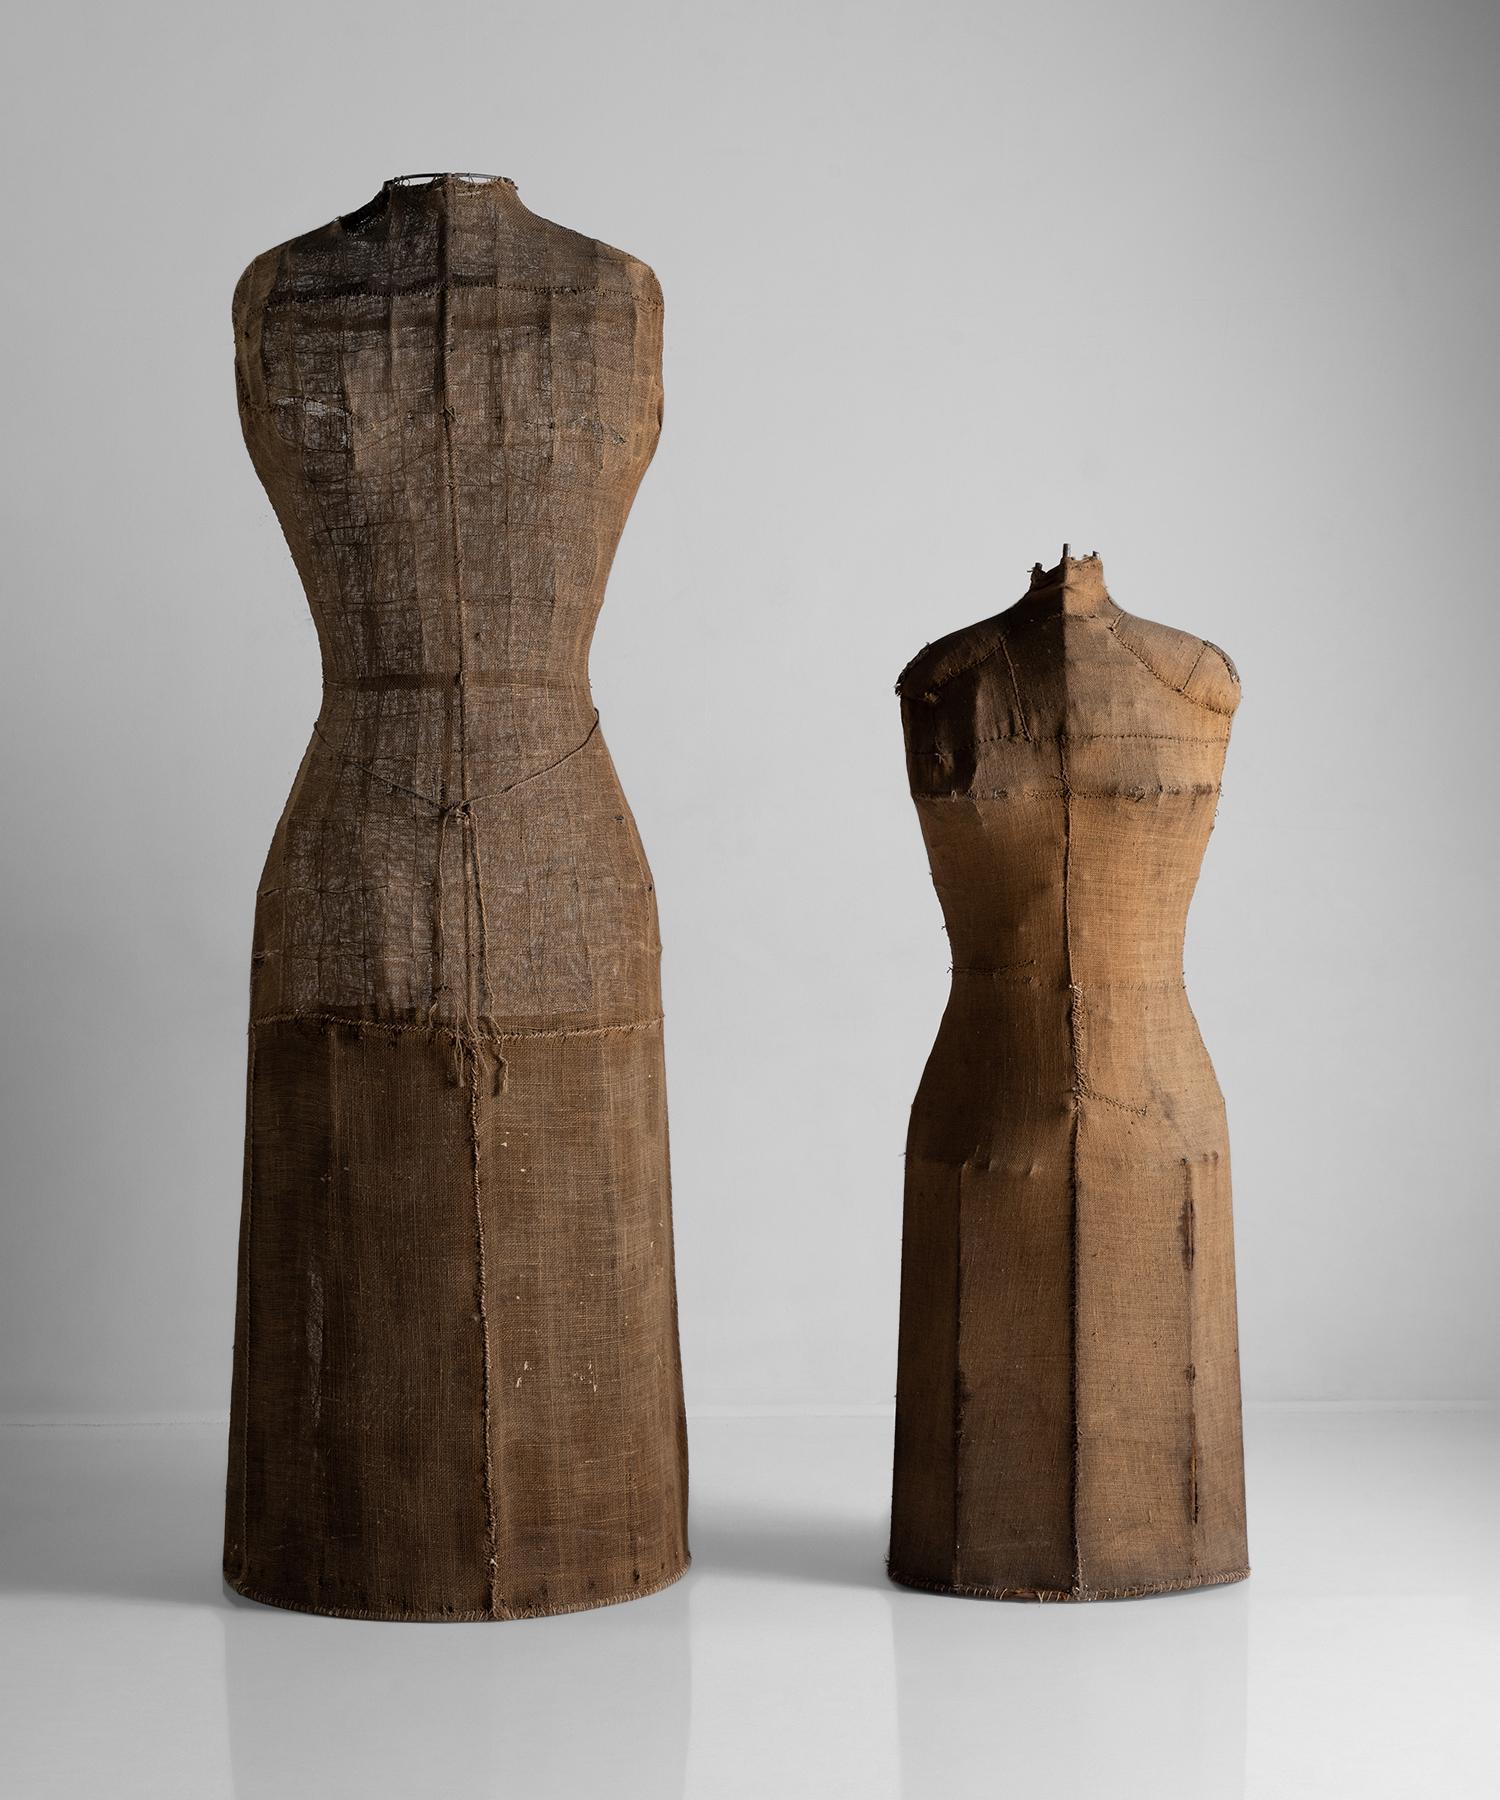 Mannequin Forms, England, circa 1890.

Larger than life Dress Forms, originally used as theater props. Metal wire frame with weathered burlap exterior.

Measures: 28